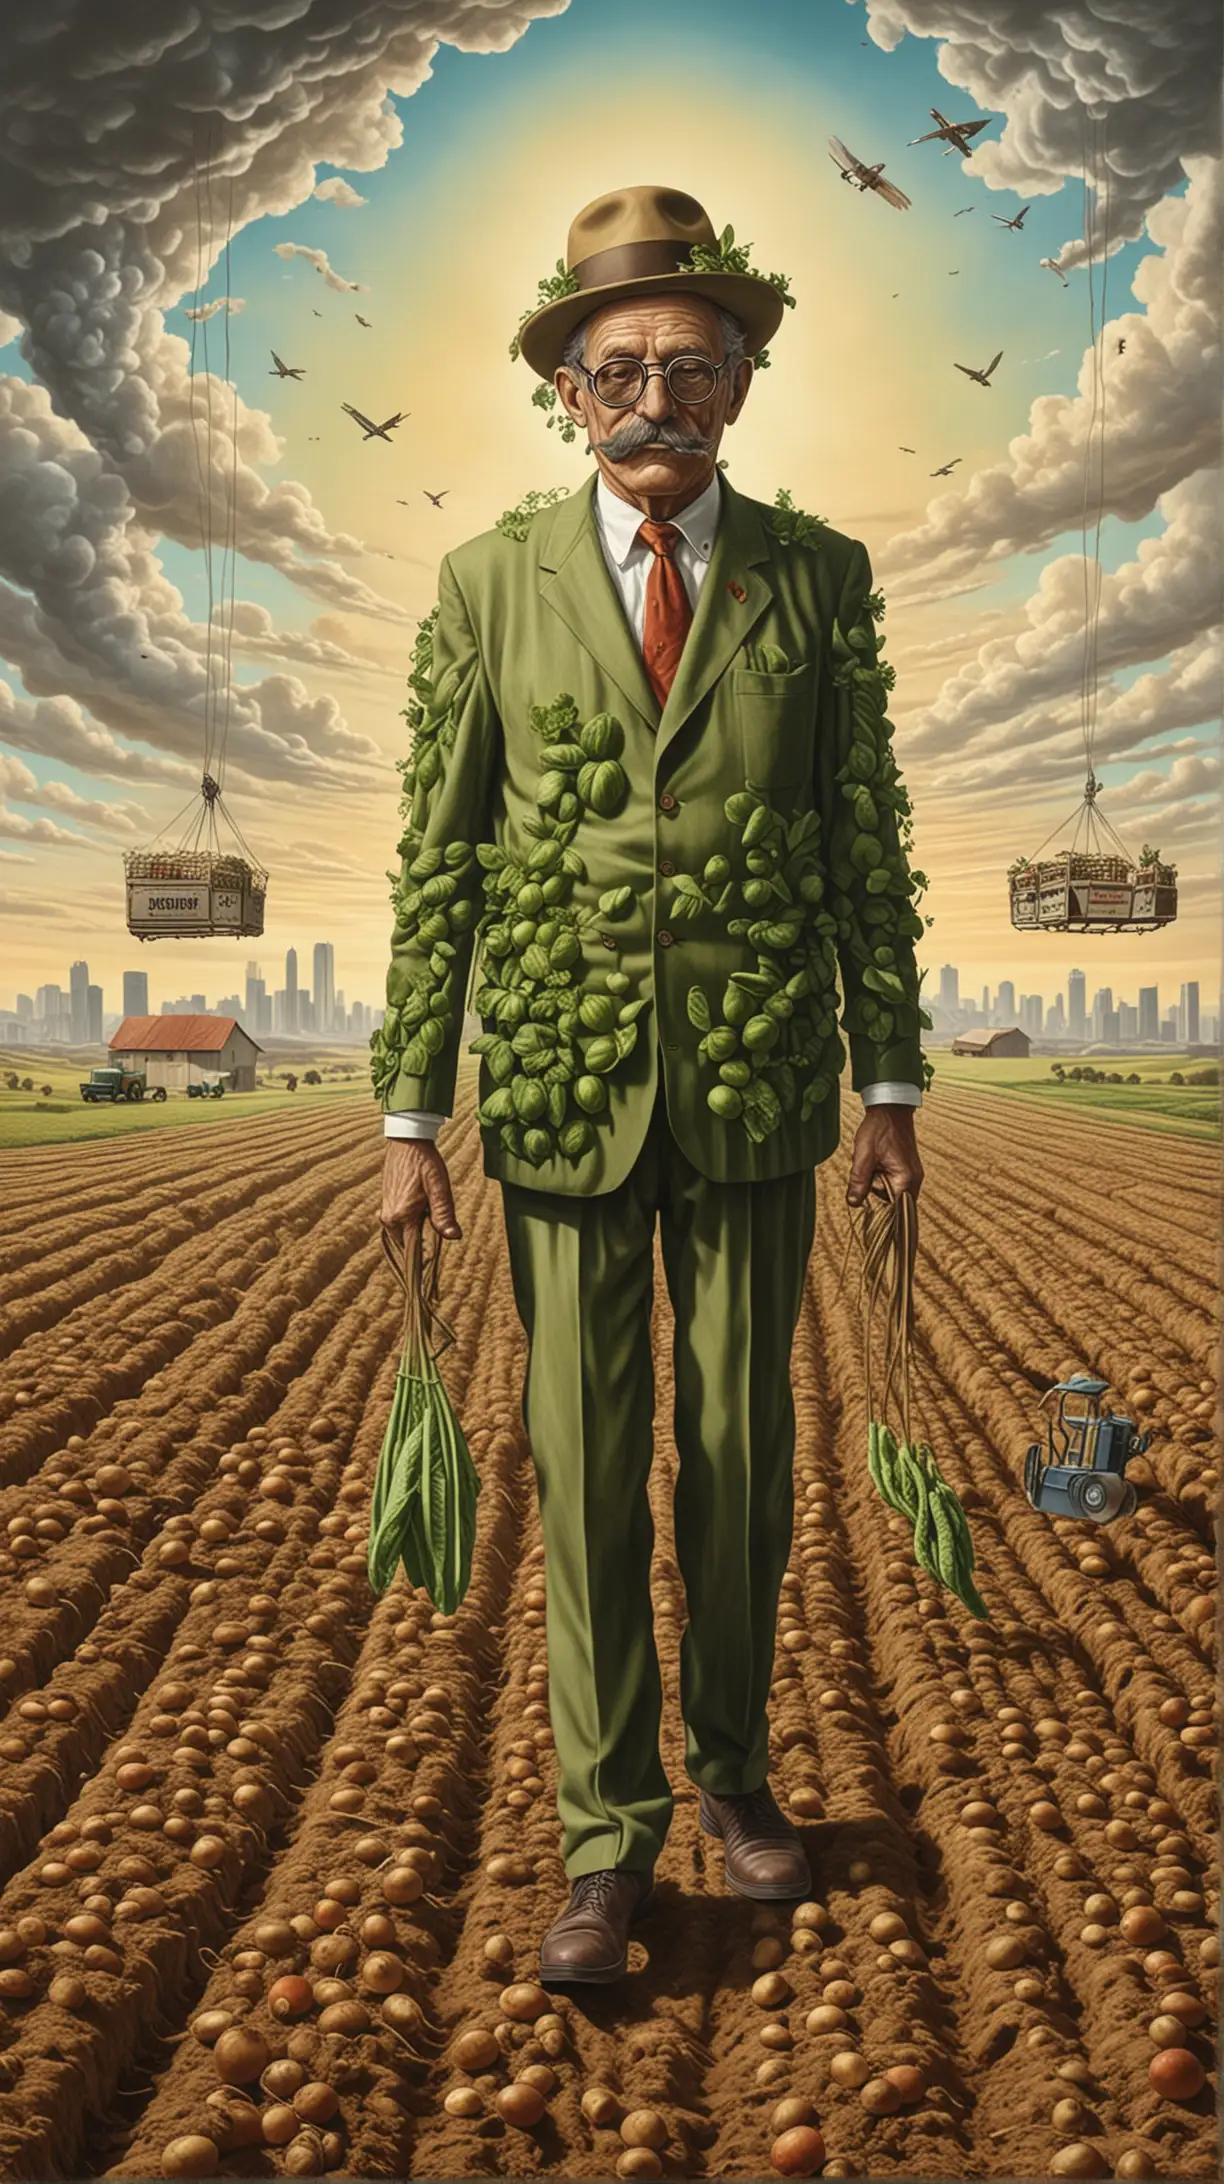 Surrealist Art Capitalism Clashing with Sustainable Agriculture